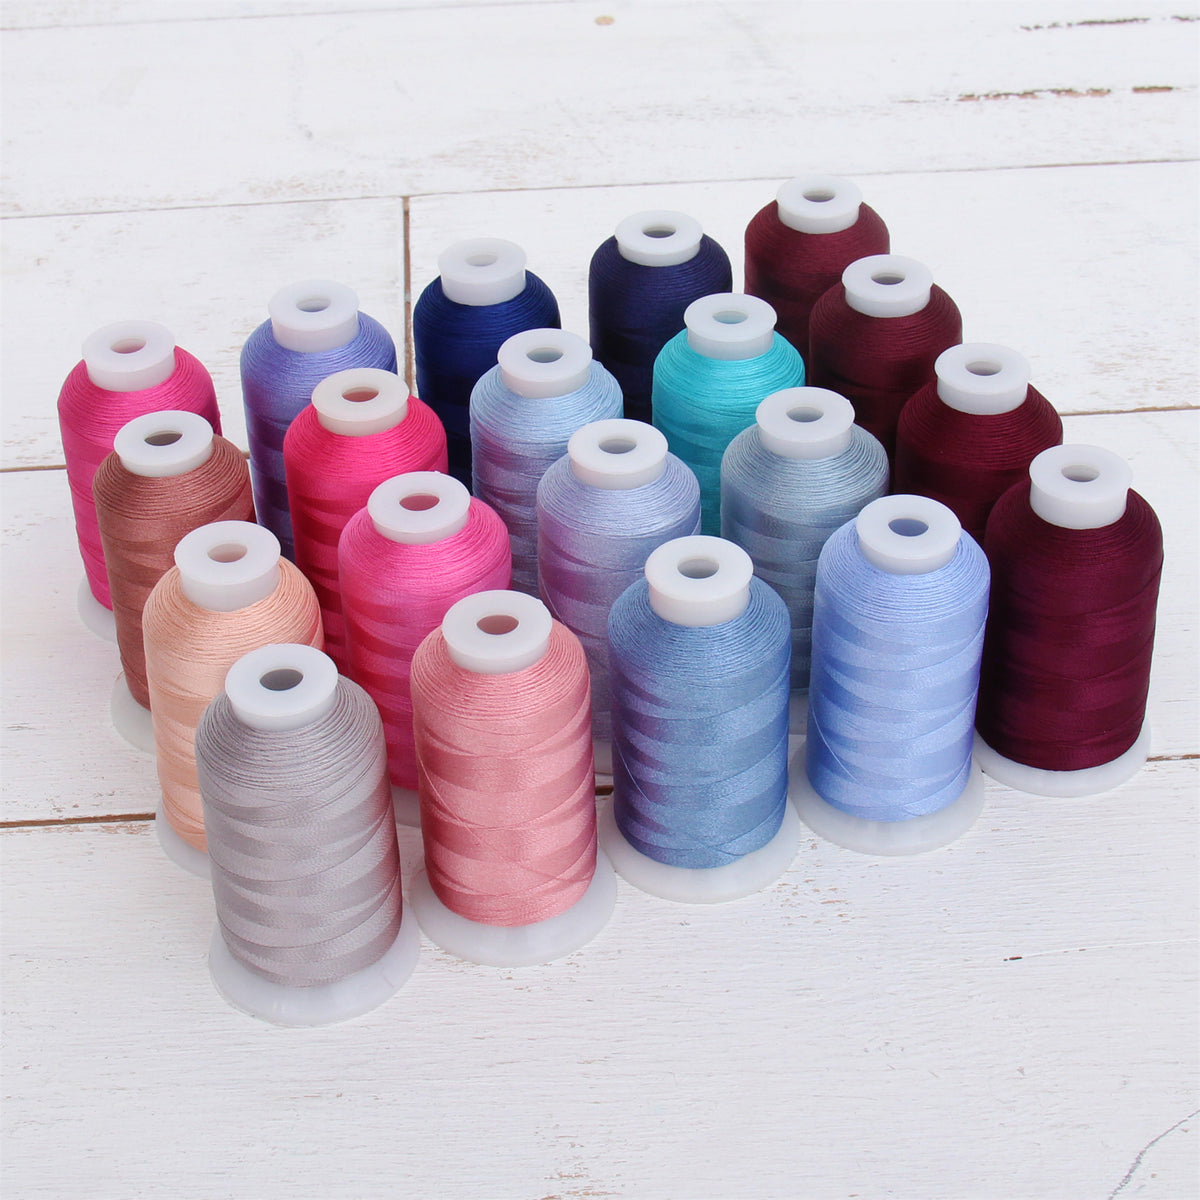 Embroidery Machine Thread - 20 Colors - 1100Yd Spools - Polyester Thread  Set - 40 Weight (120D/2) Premium Thread - Embroidery and Sewing